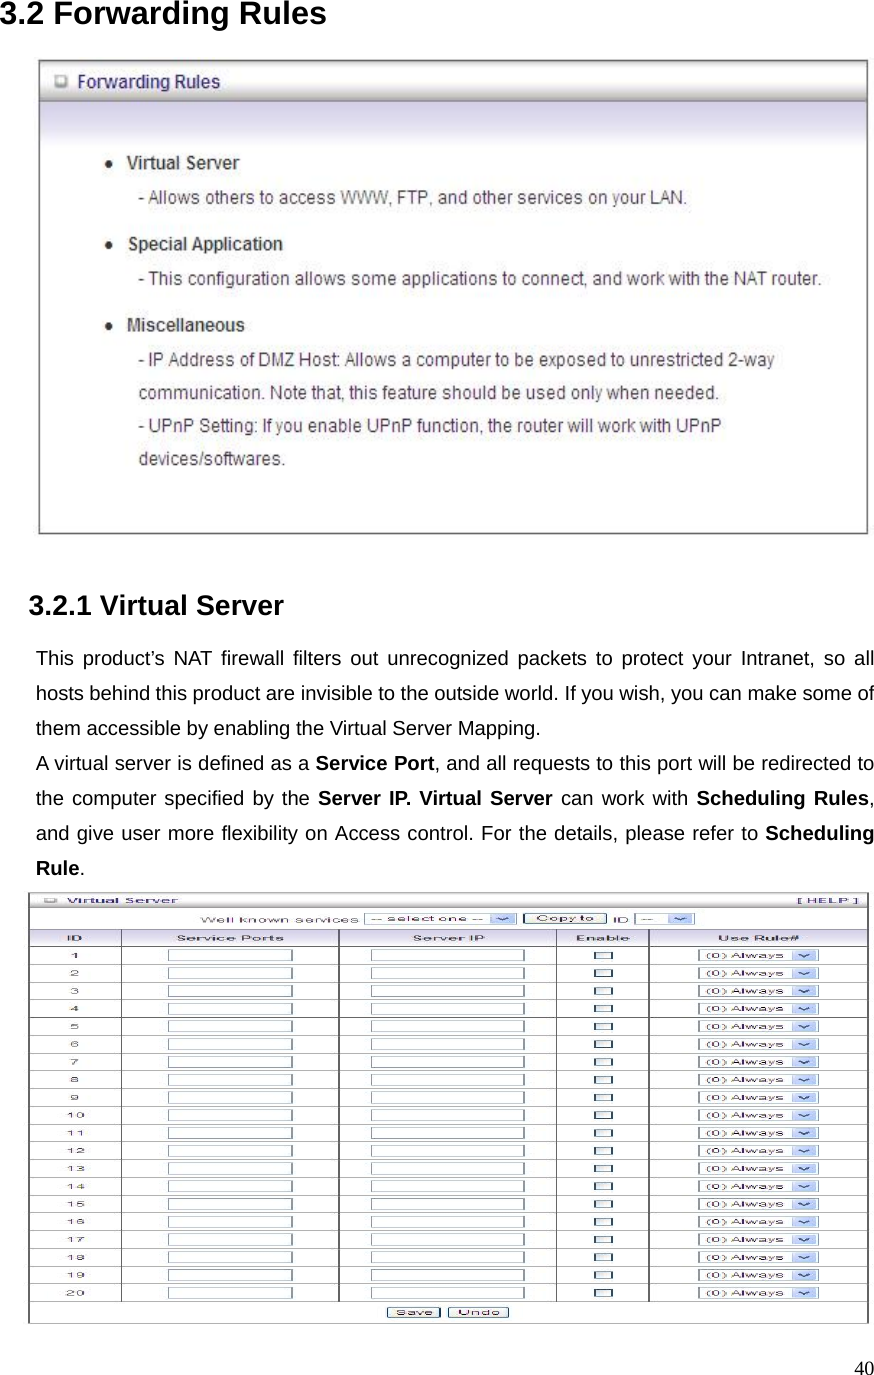  403.2 Forwarding Rules     3.2.1 Virtual Server      This product’s NAT firewall filters out unrecognized packets to protect your Intranet, so all hosts behind this product are invisible to the outside world. If you wish, you can make some of them accessible by enabling the Virtual Server Mapping. A virtual server is defined as a Service Port, and all requests to this port will be redirected to the computer specified by the Server IP. Virtual Server can work with Scheduling Rules, and give user more flexibility on Access control. For the details, please refer to Scheduling Rule.   